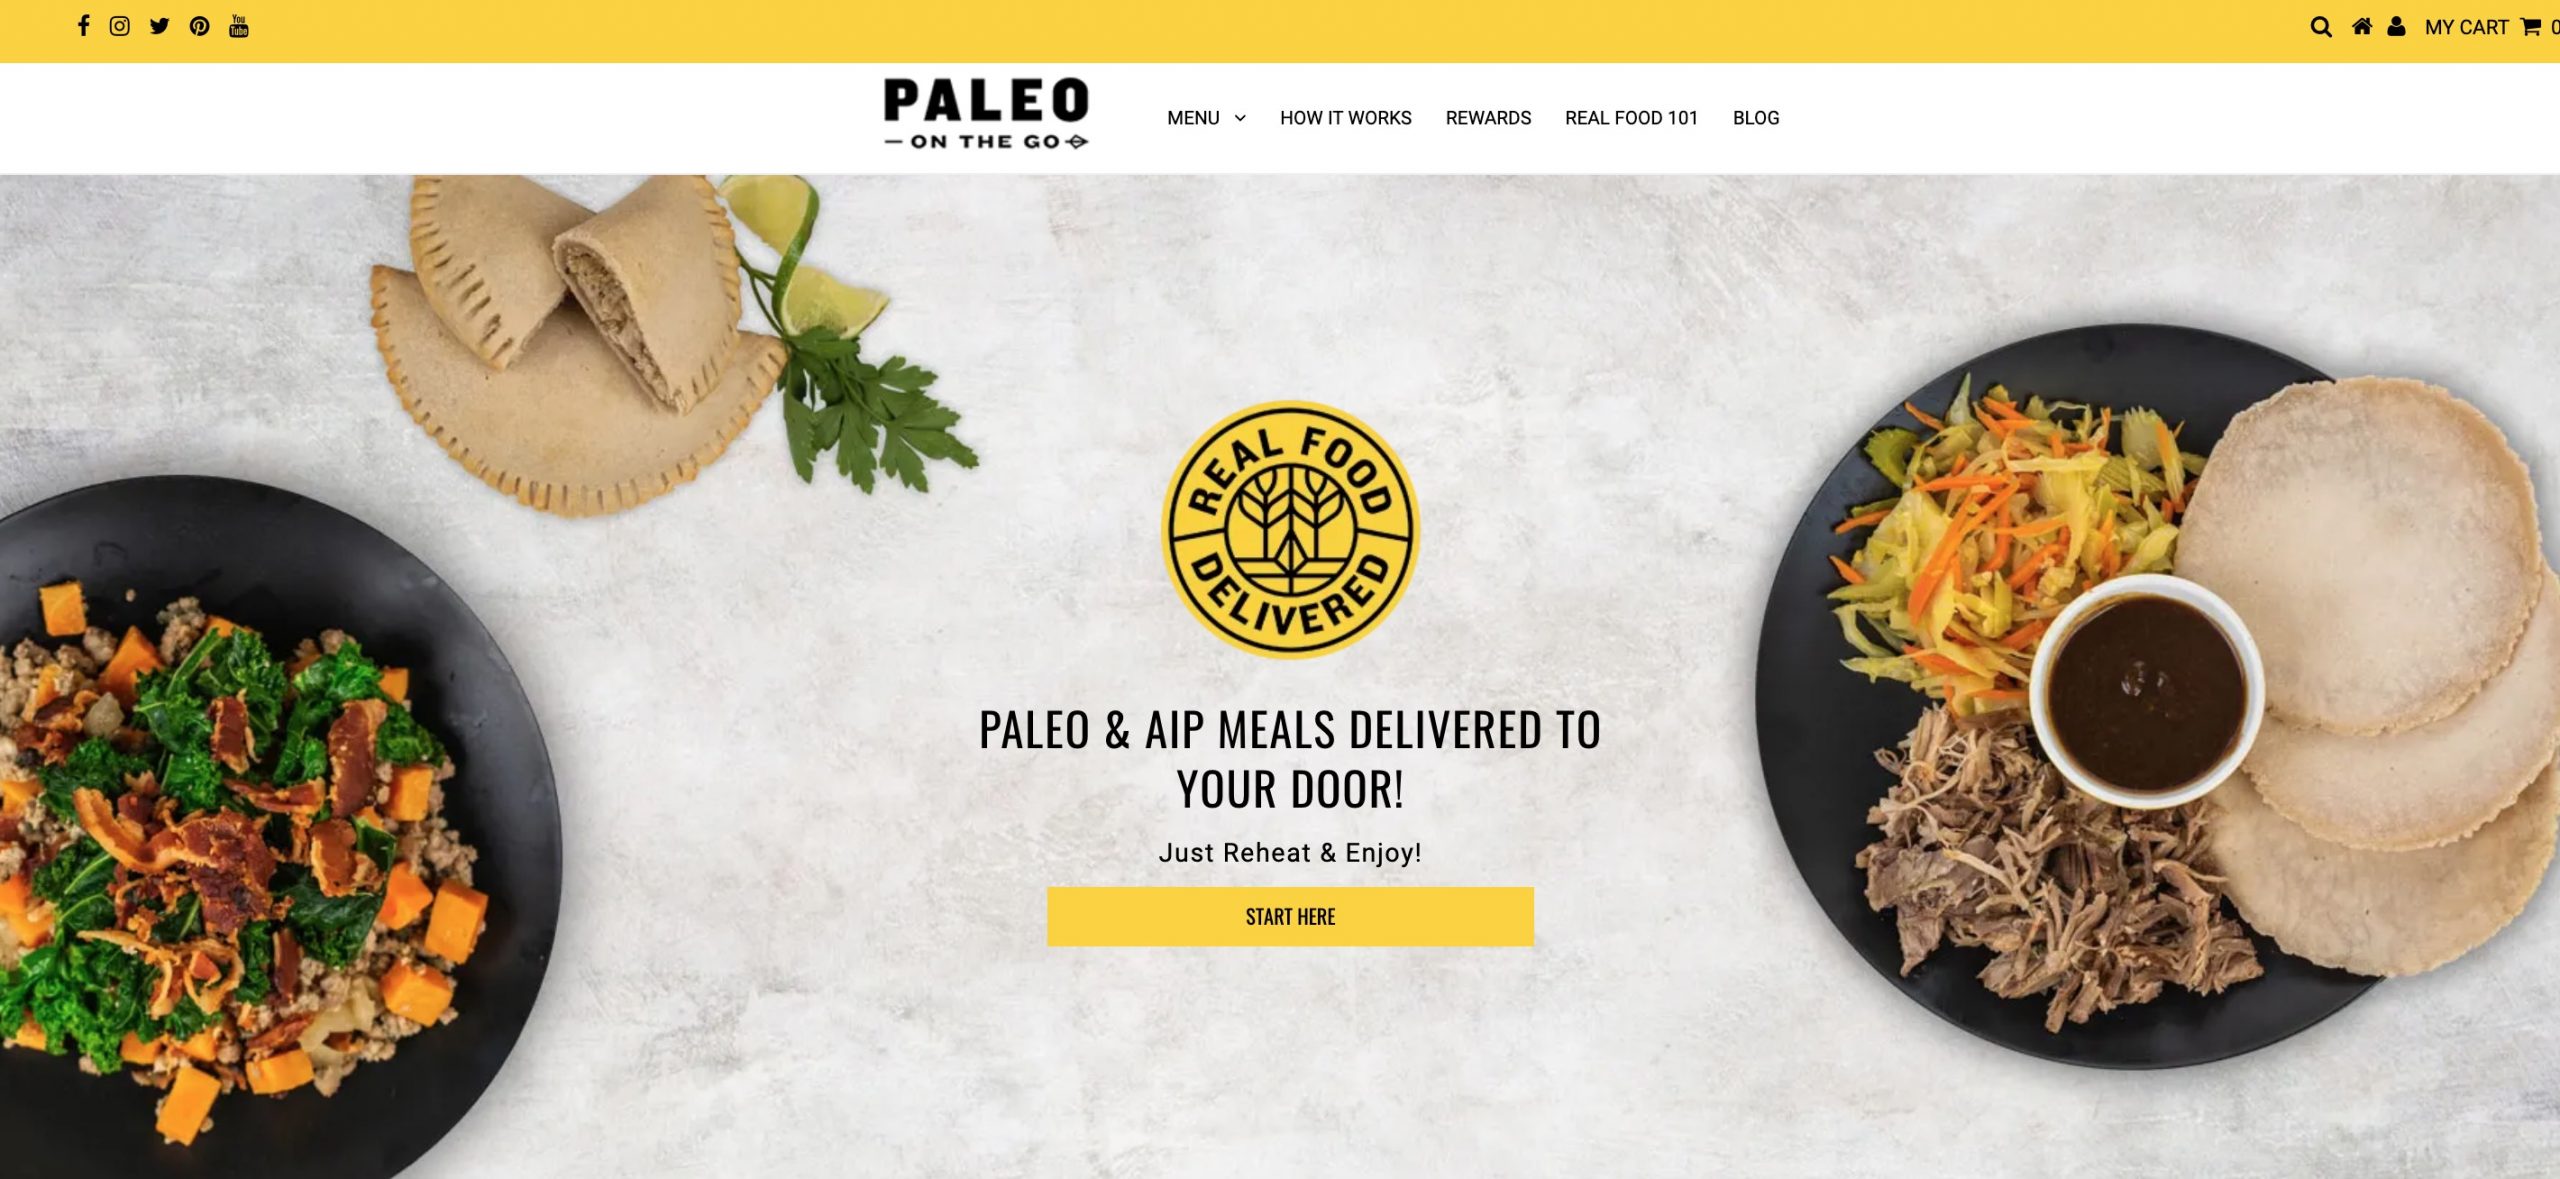 Paleo on the Go Short main page